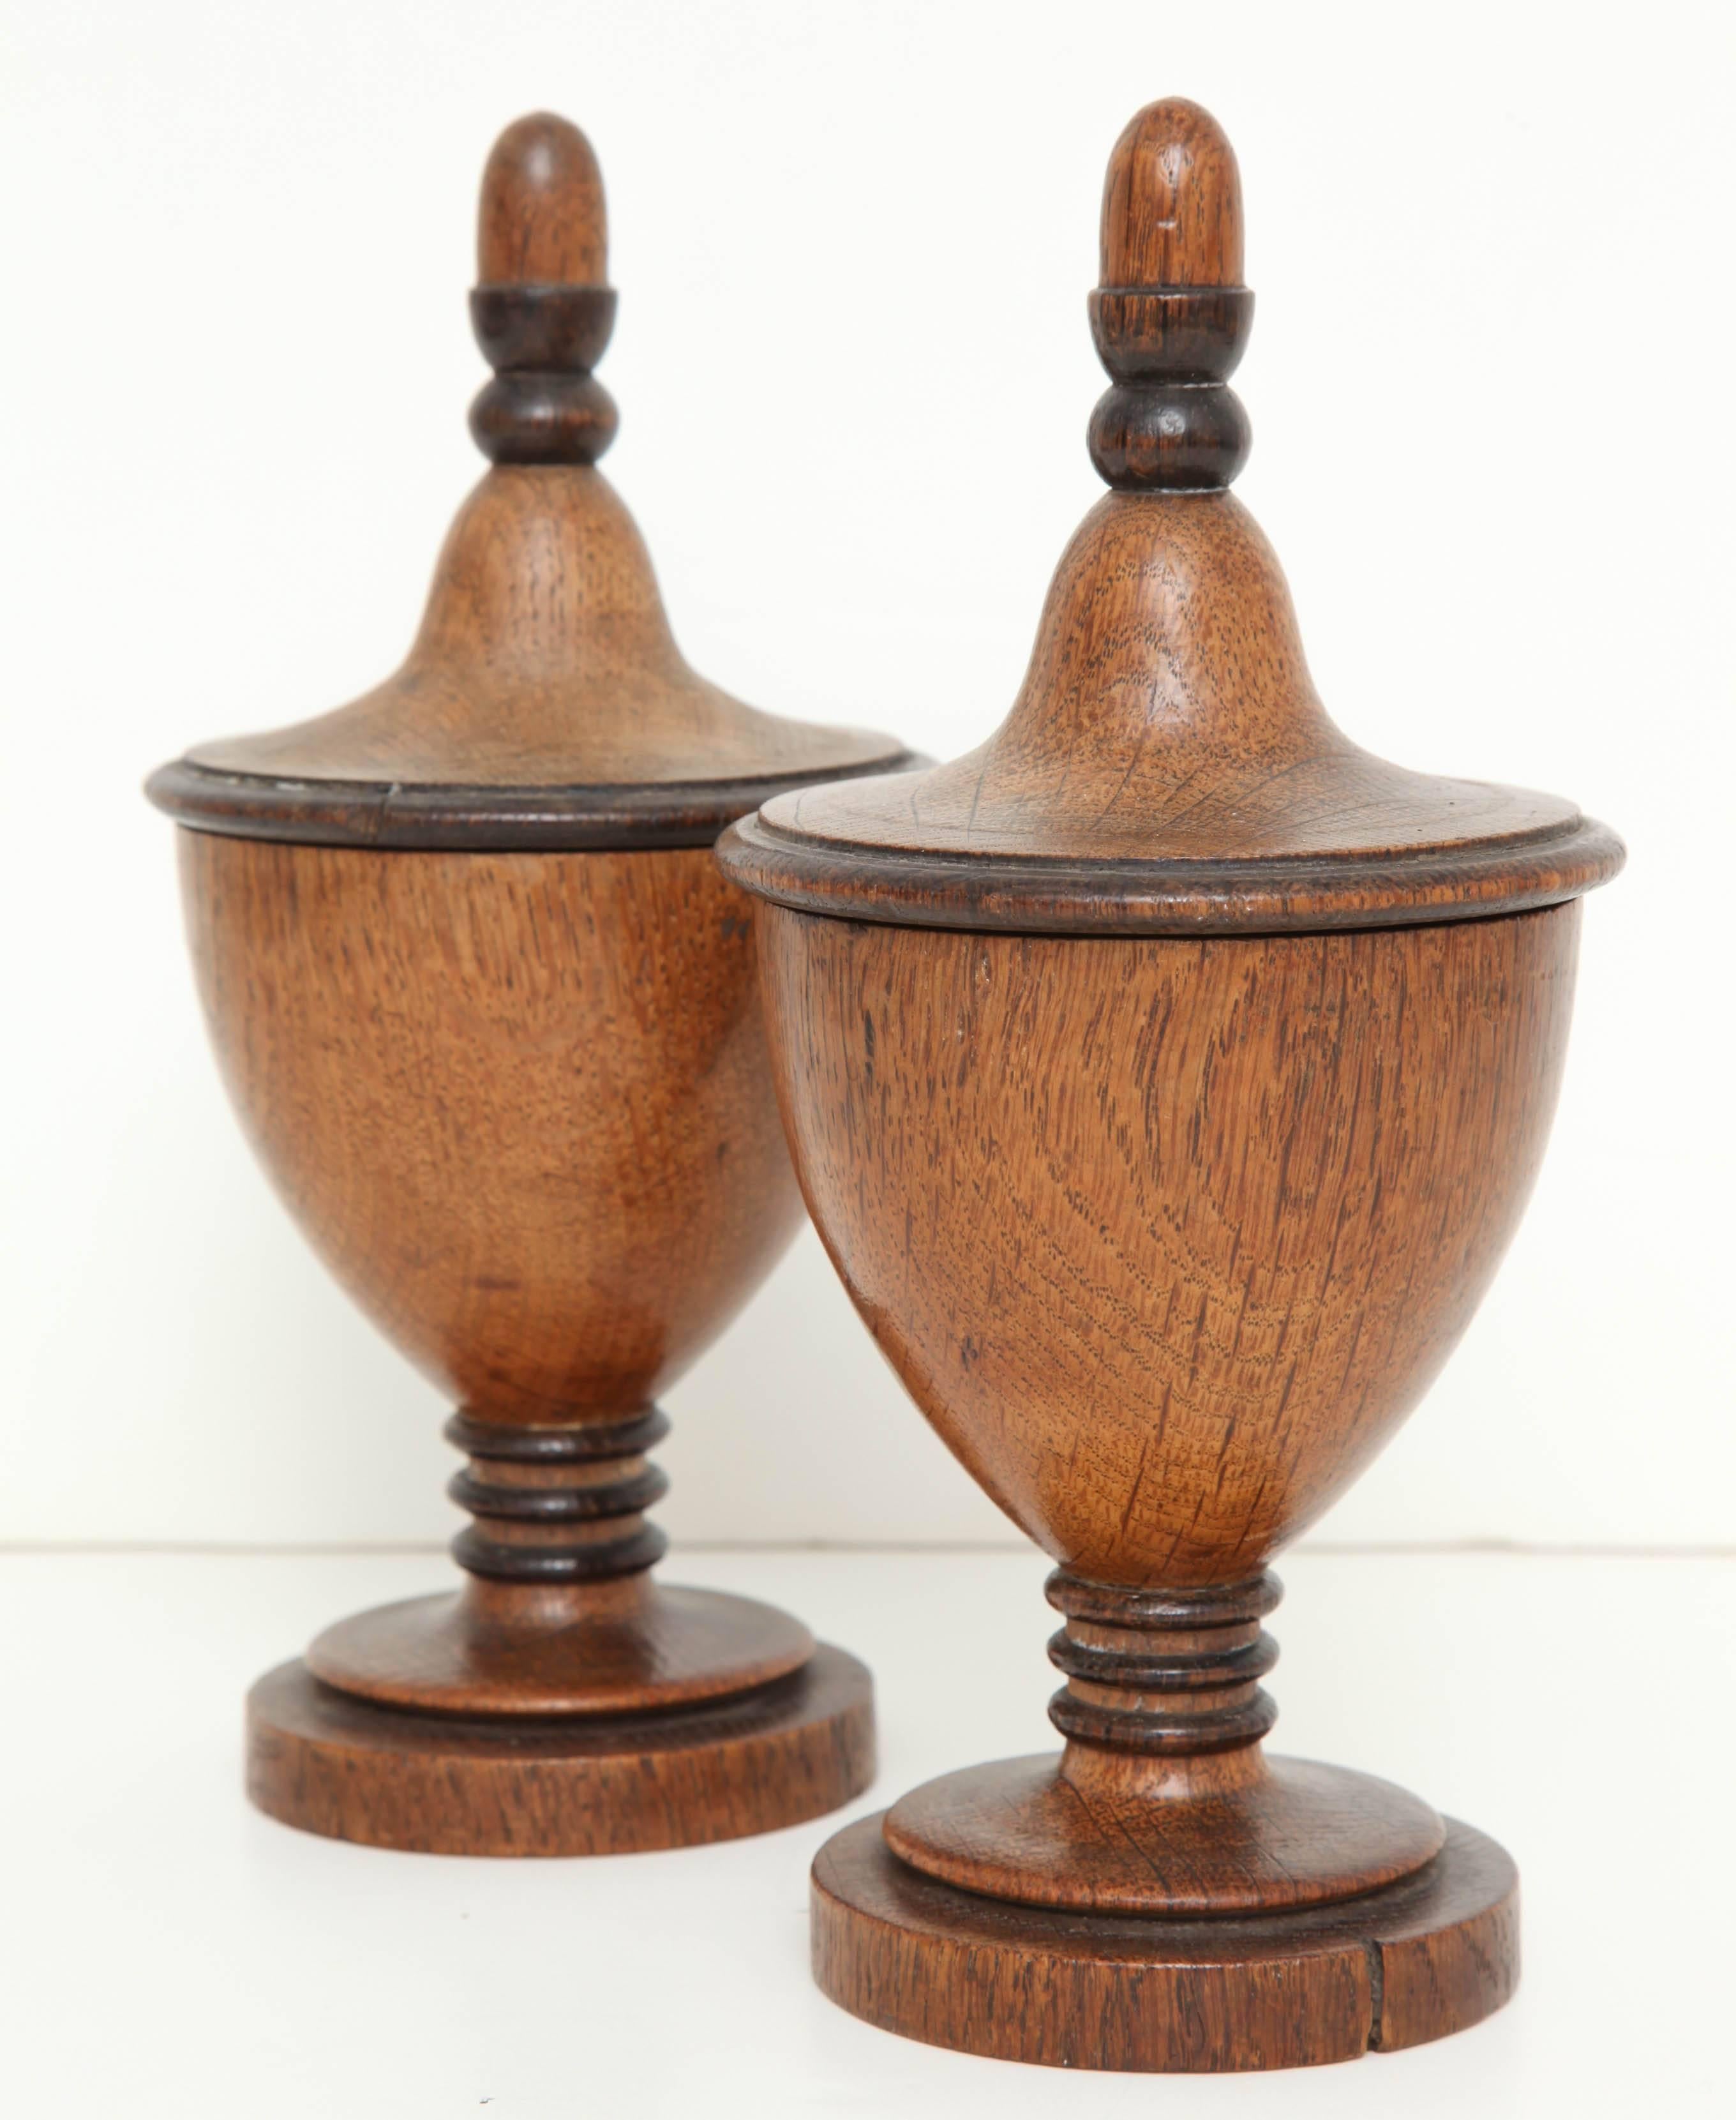 A pair of early 19th century English neoclassical turned oak and ebonized tureen lidded urns circa 1820